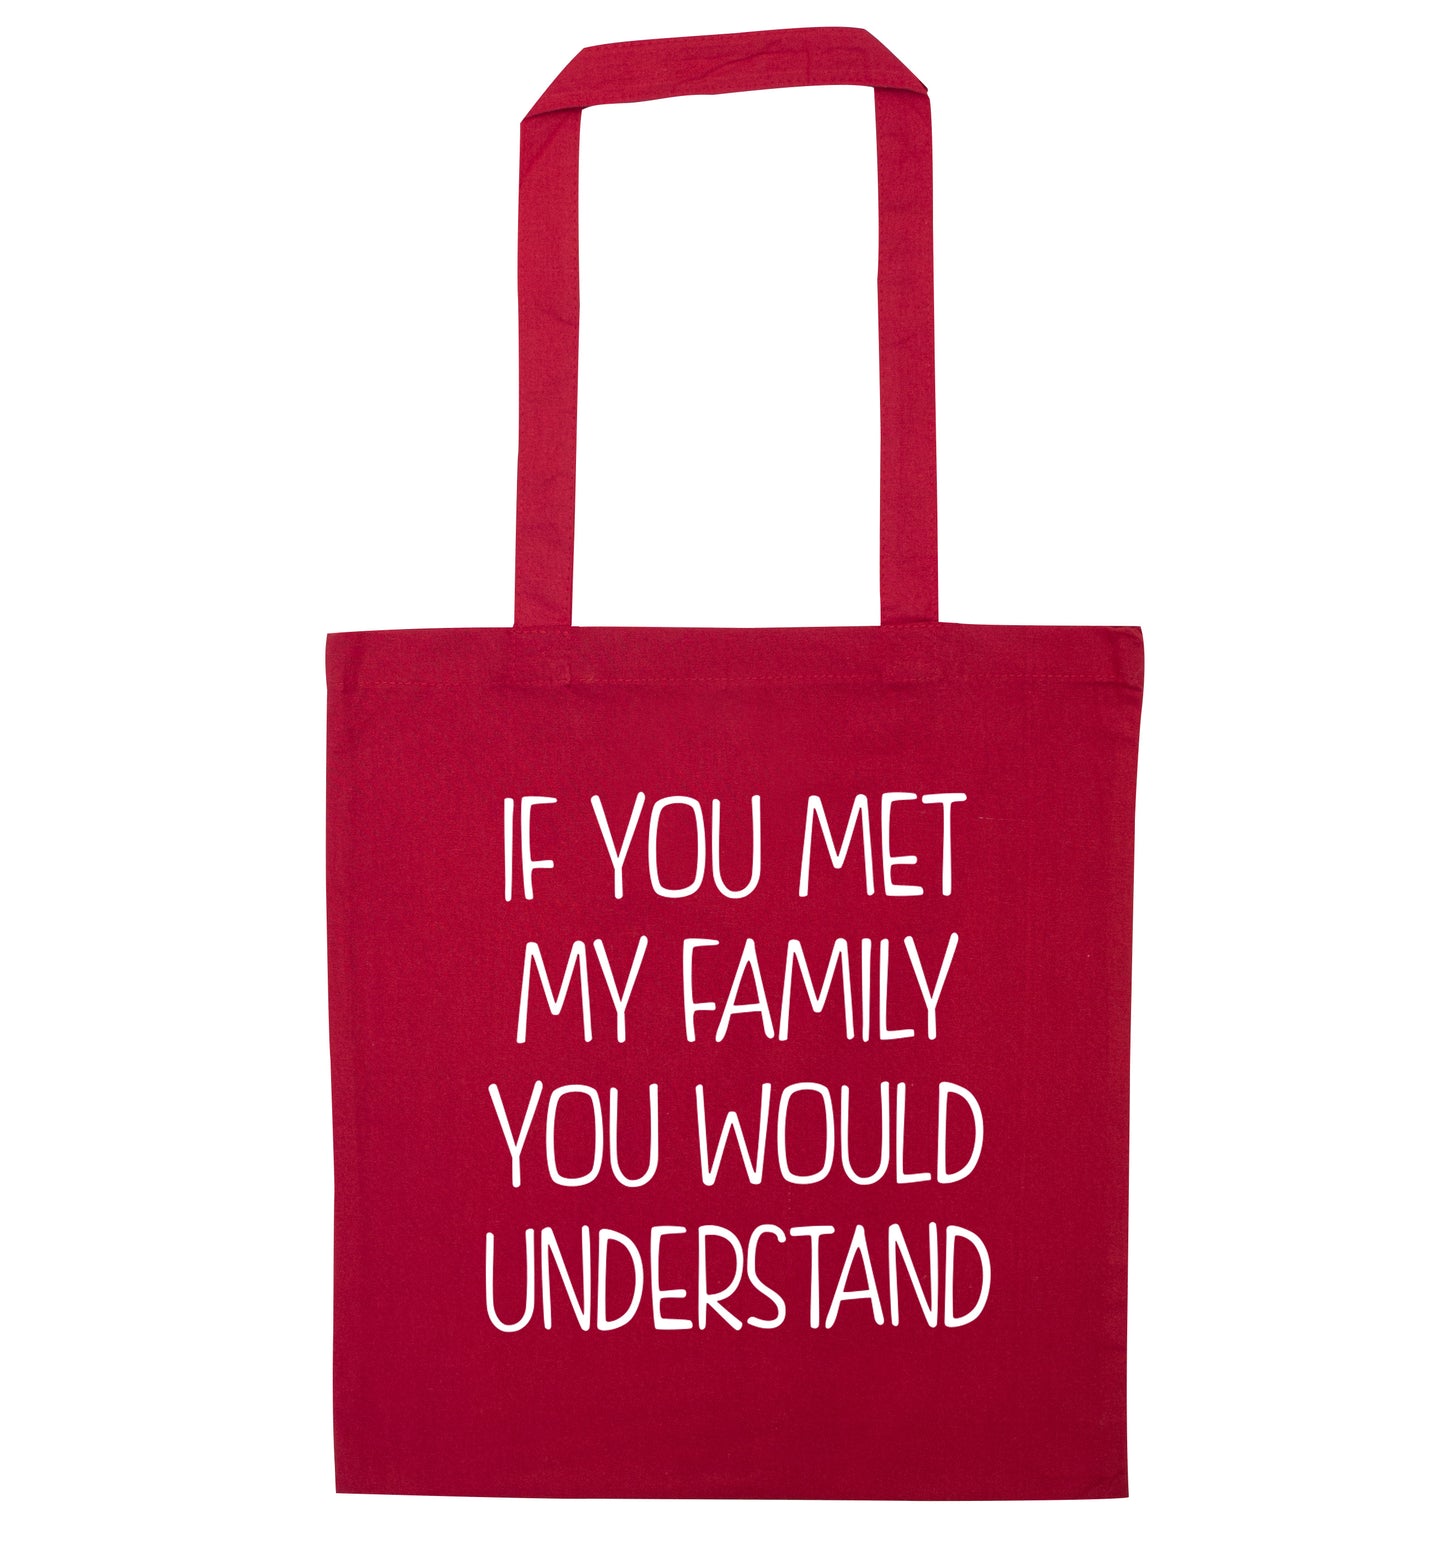 If you met my family you would understand red tote bag